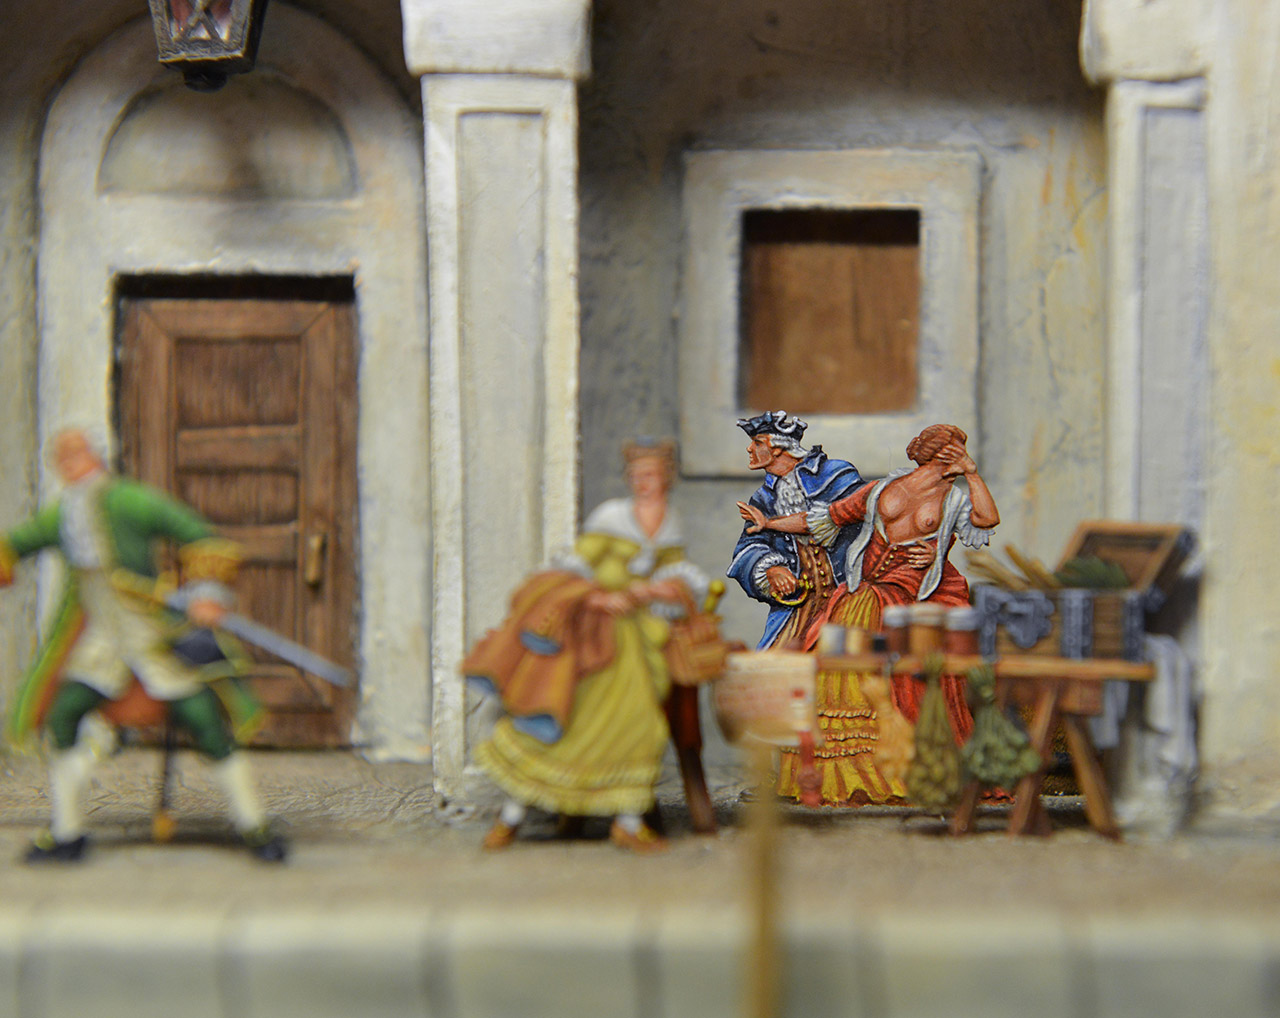 Dioramas and Vignettes: The Duel, photo #4